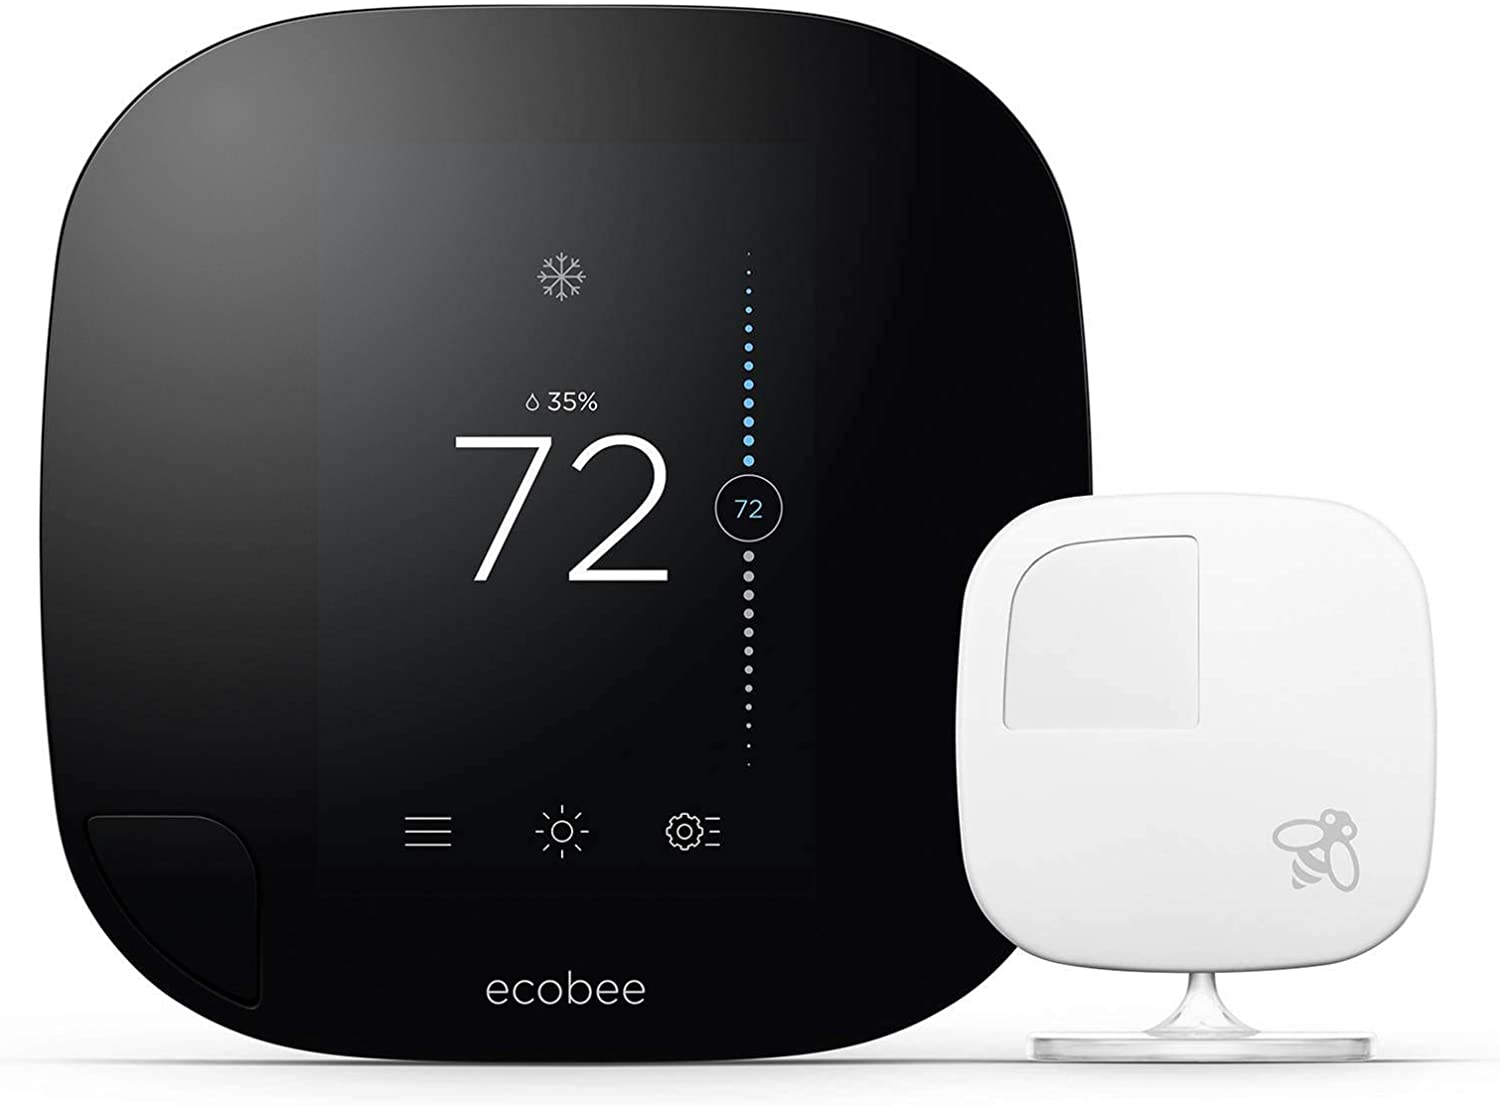 ecobee Inc. EB-STATe3-02 Smart WiFi Thermostat with Room Sensor (Certified Refurbished)